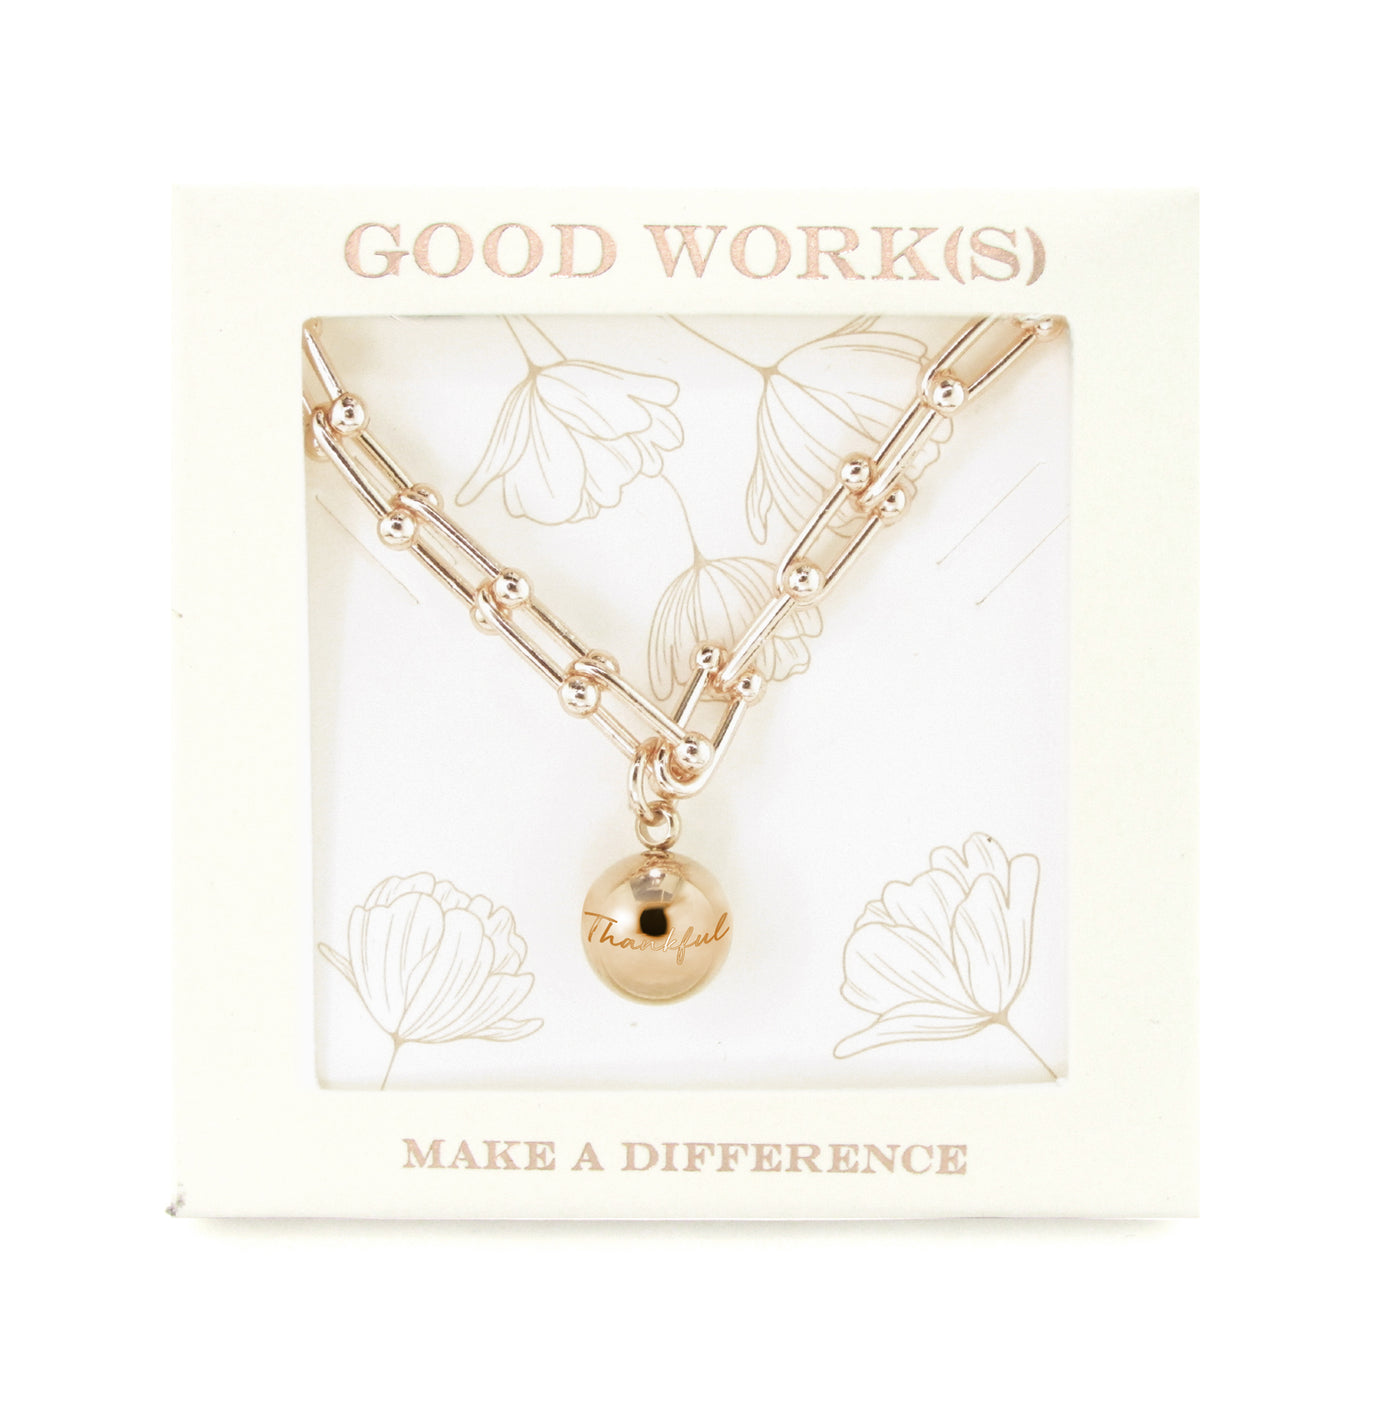 Thankful Necklace-Good Work(s) Make A Difference® | Christian and Inspirational Jewelry Company in Vernon, California